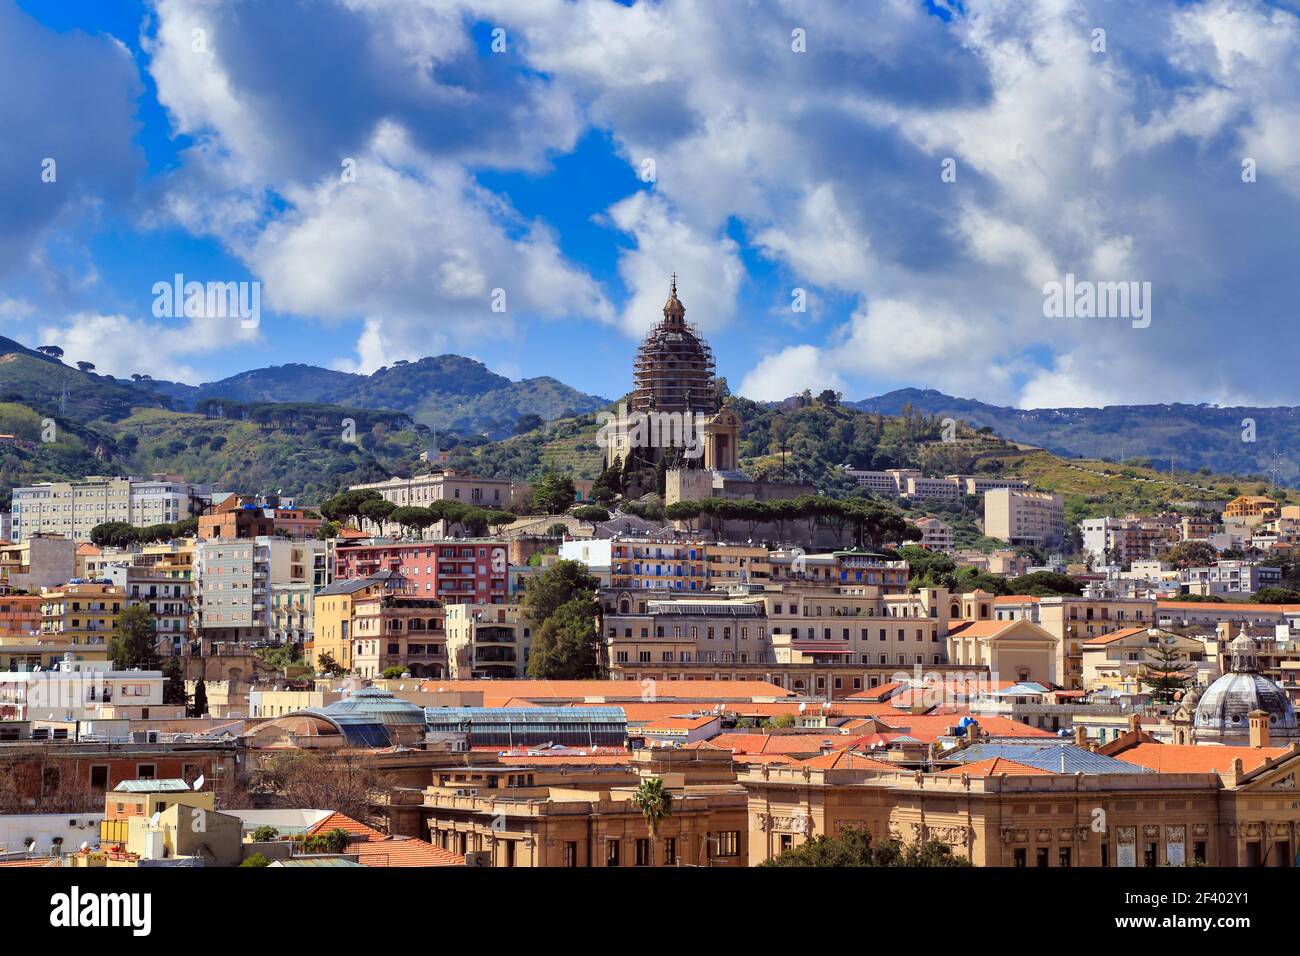 View across the rooftops from the port of Messina, Sicily, with the Peloritani mountains in the distance Stock Photo